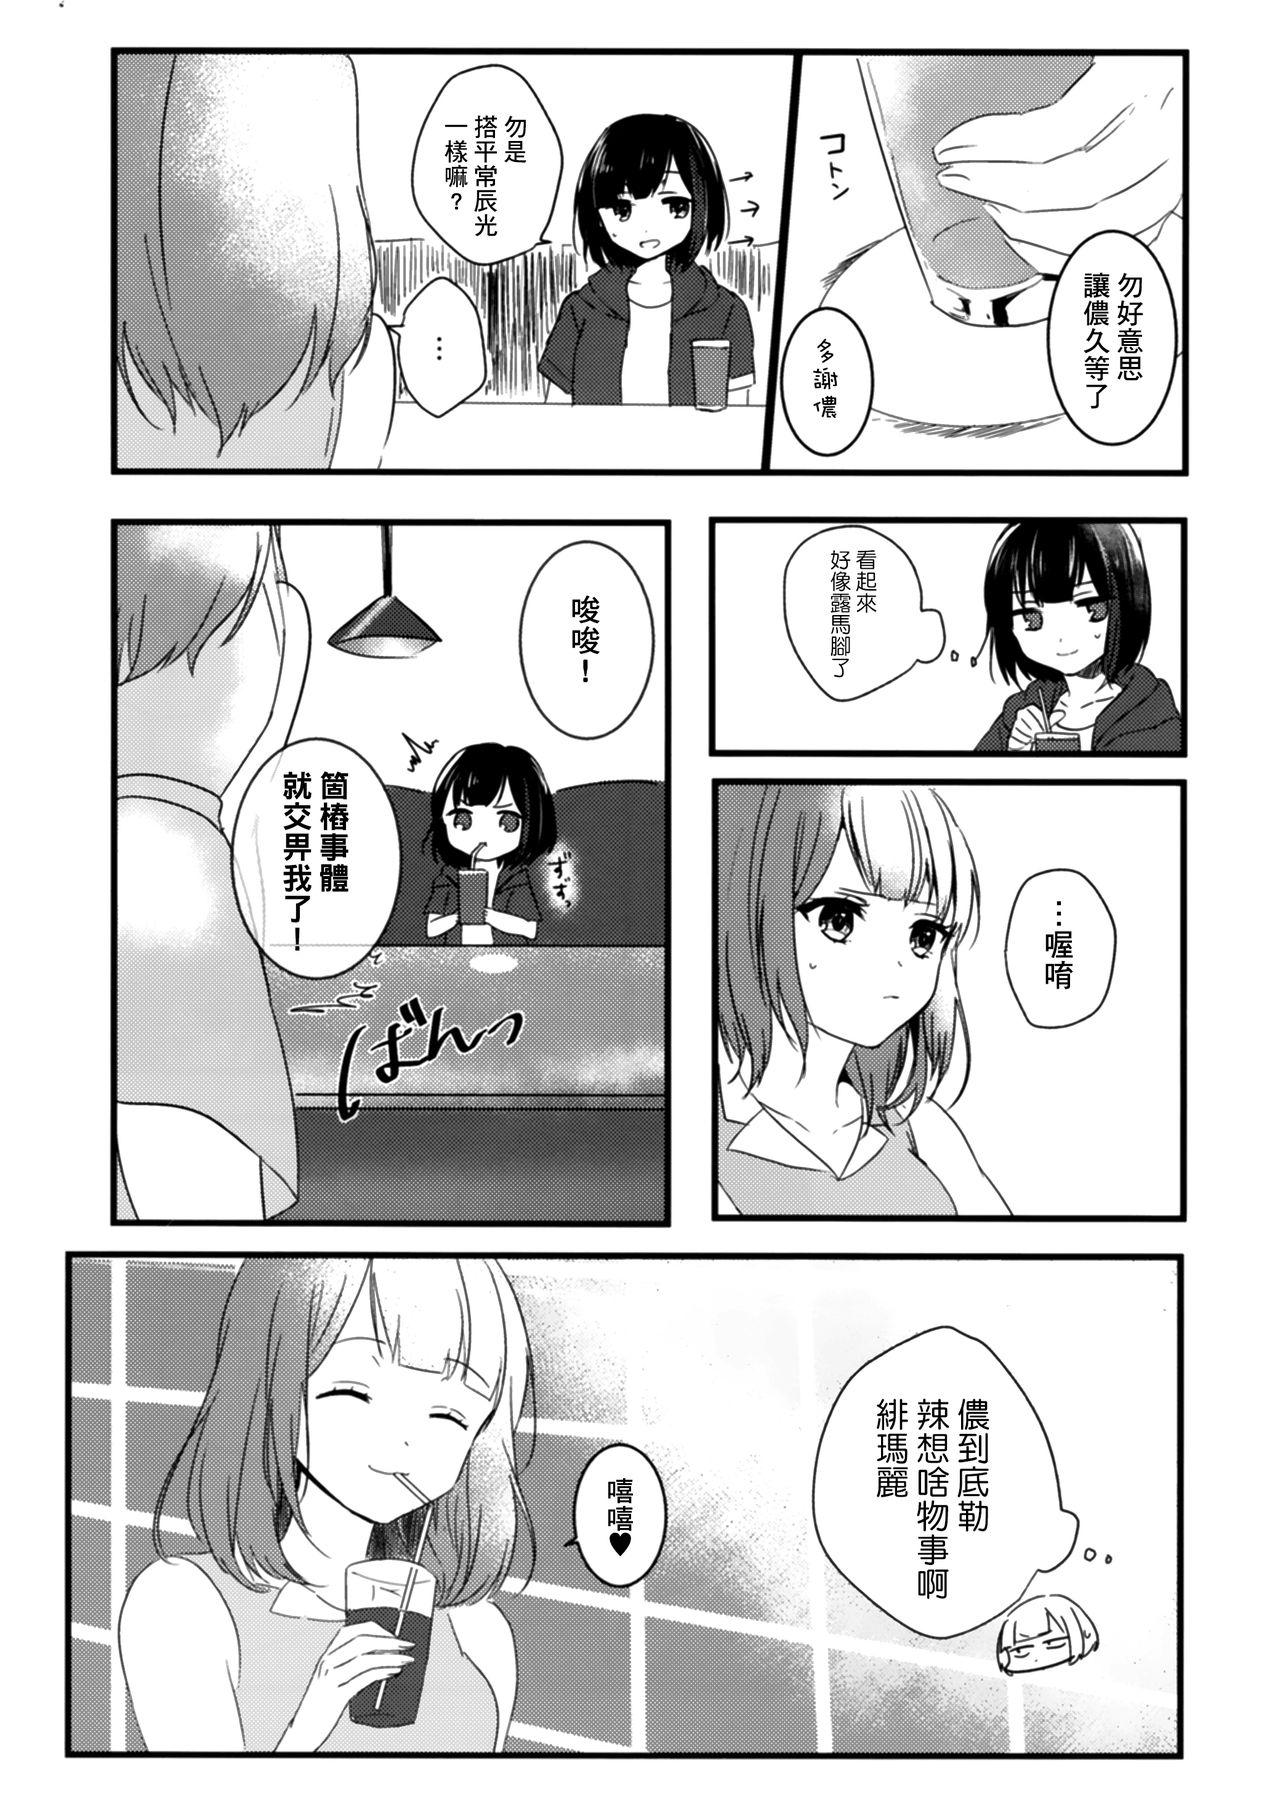 Gays Secret relationship - Bang dream Booty - Page 8